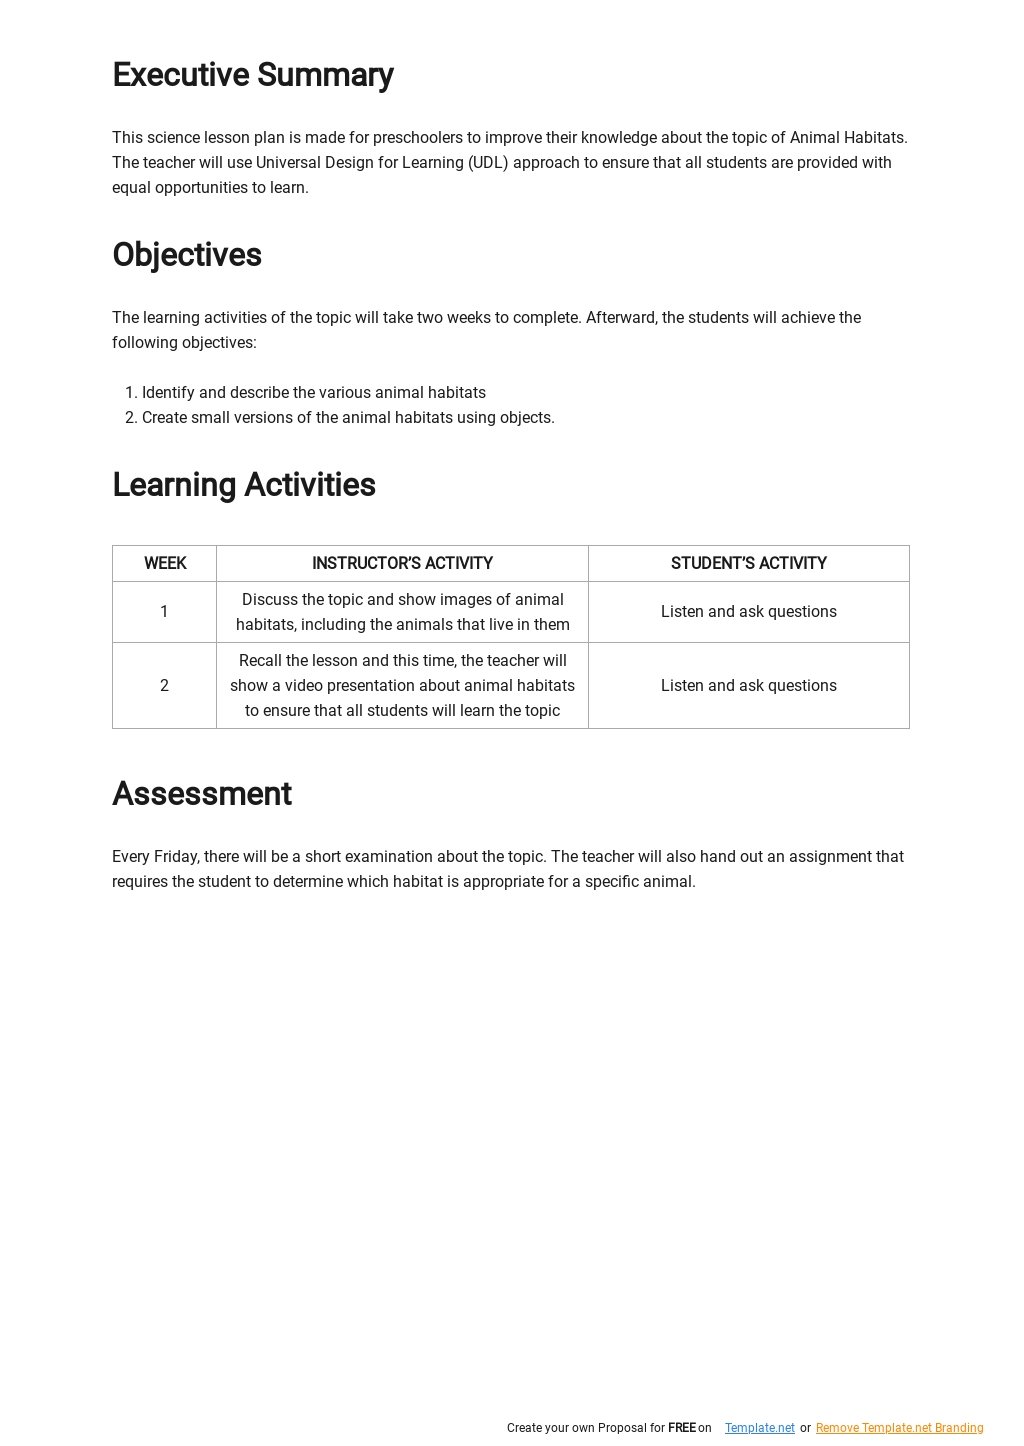 UDL Lesson Plan for Preschool Template in Google Docs, Word, Apple